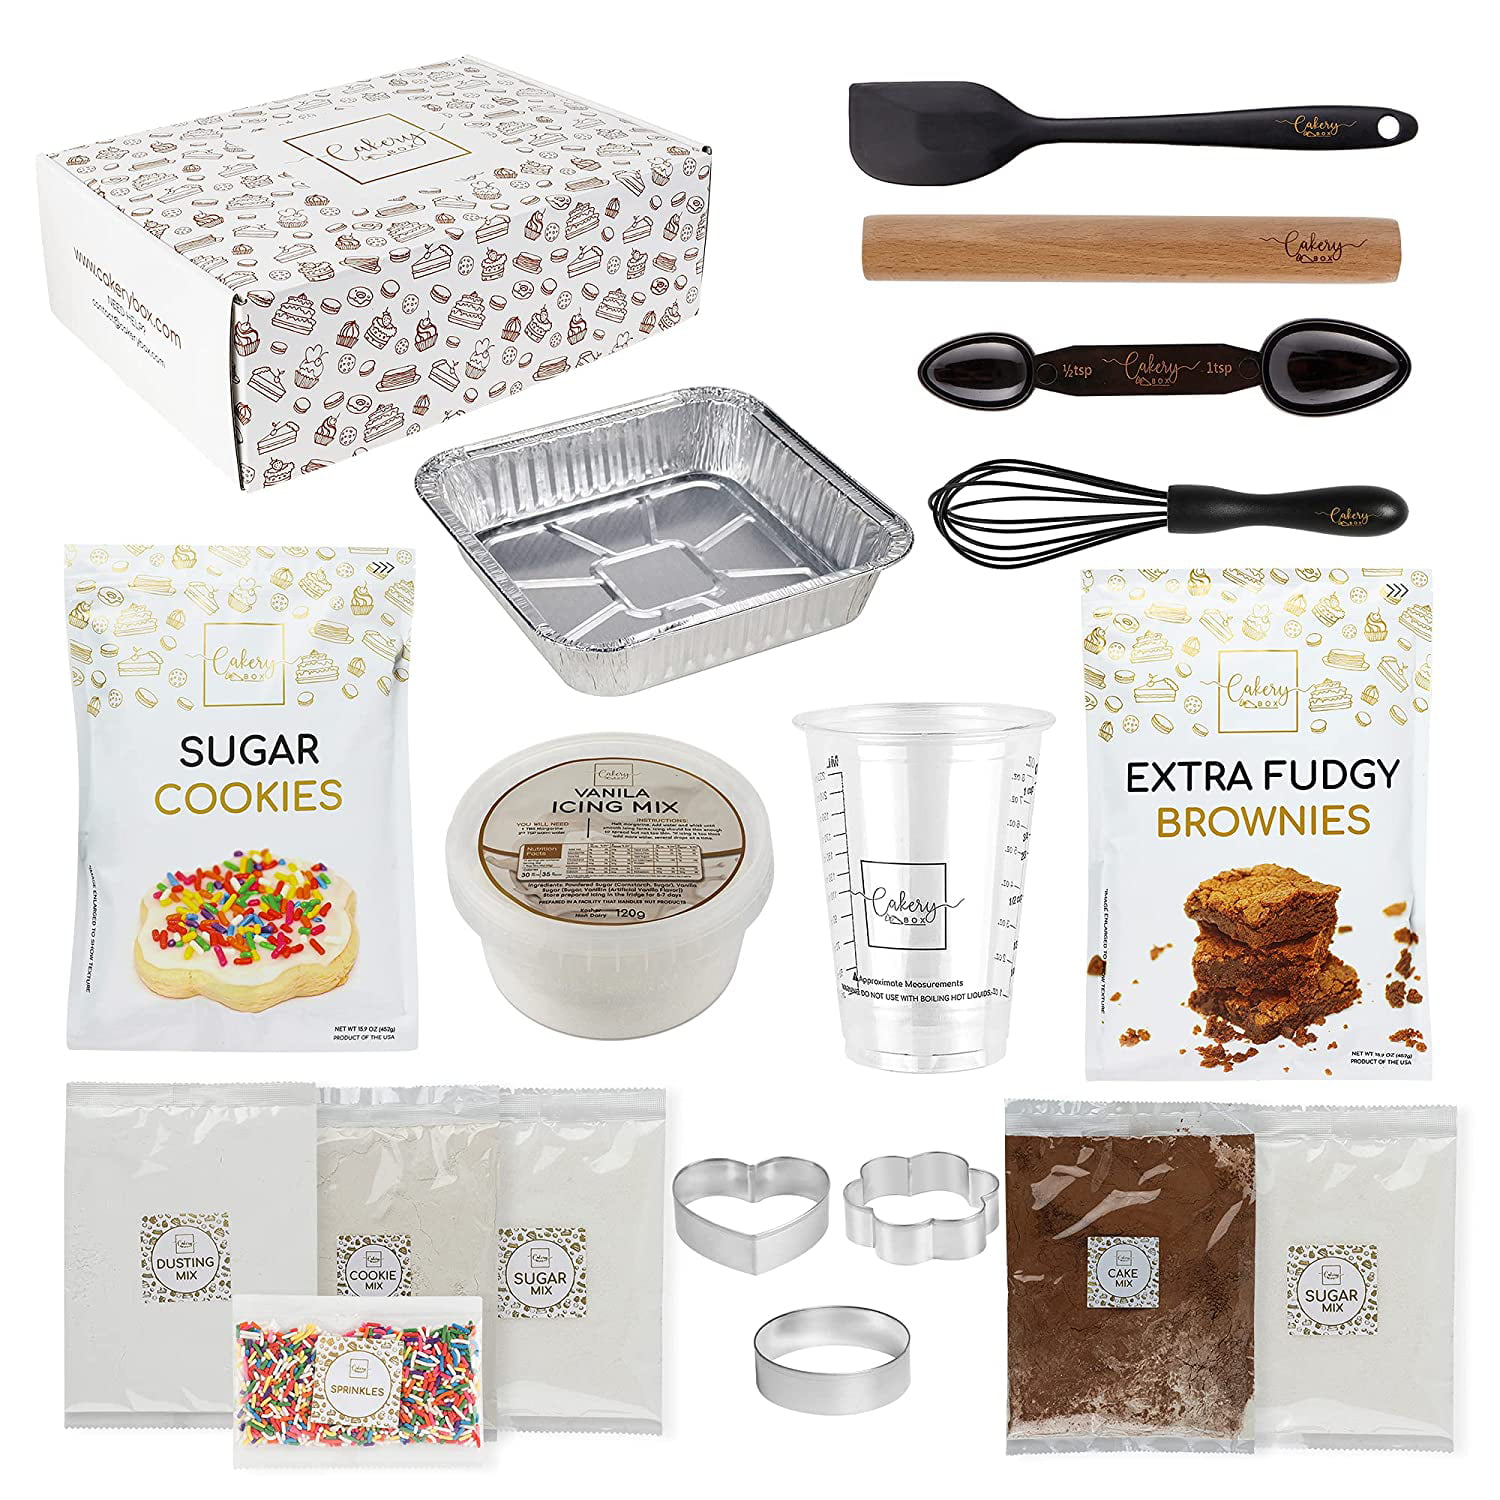 DIY Baking Kit - Baking Set & Supplies for Adults & Teens - Sugar Cookie  Mix & Chocolate Chip Cookie Mix, Icing Mix, Rolling Pin, Spatula, Cookie  Cutter, Pan, & Measuring Tools (